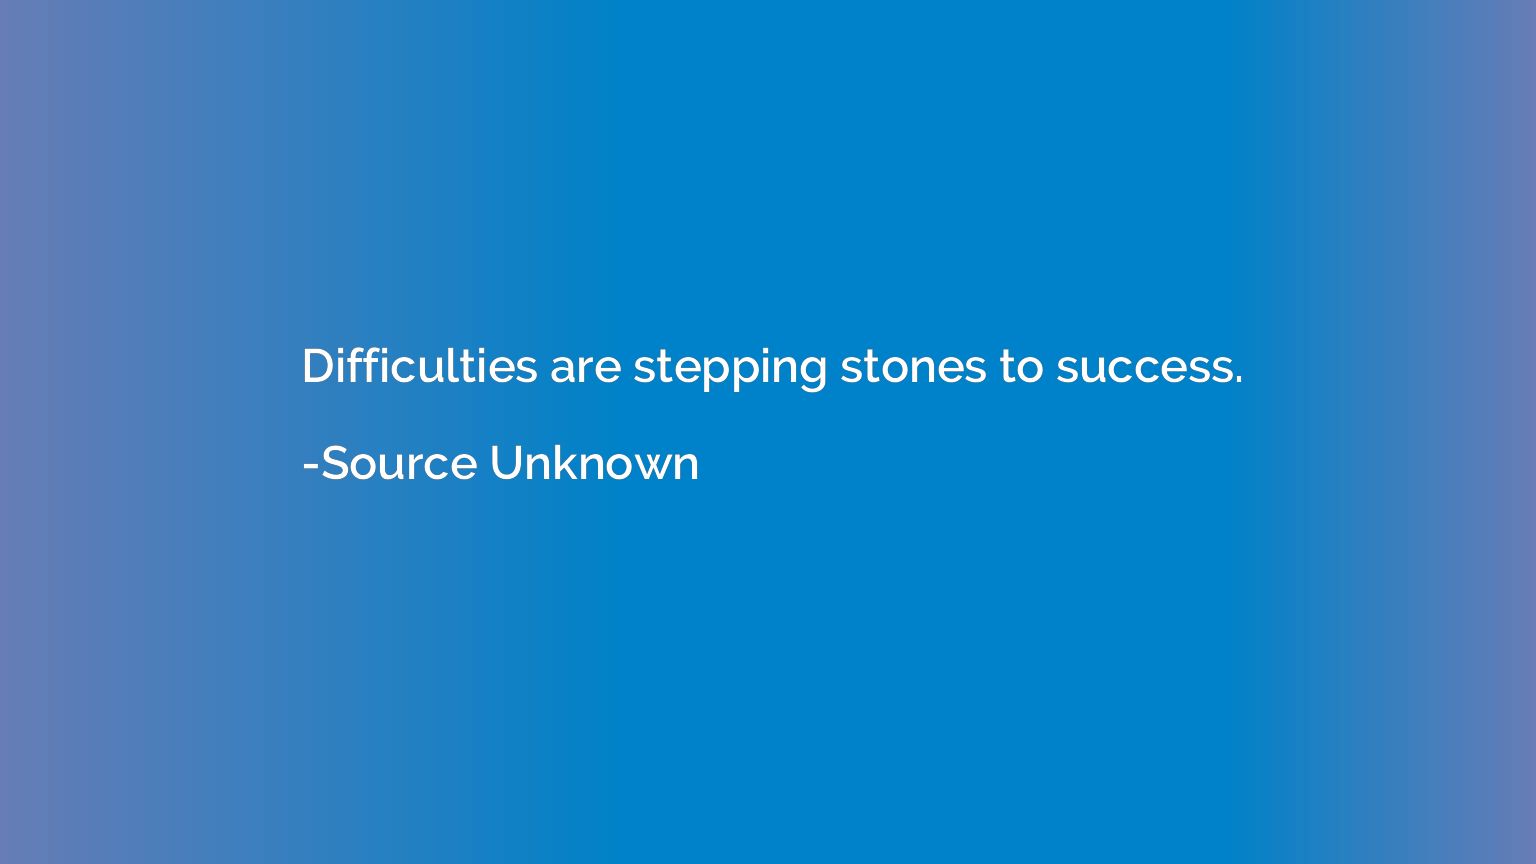 Difficulties are stepping stones to success.